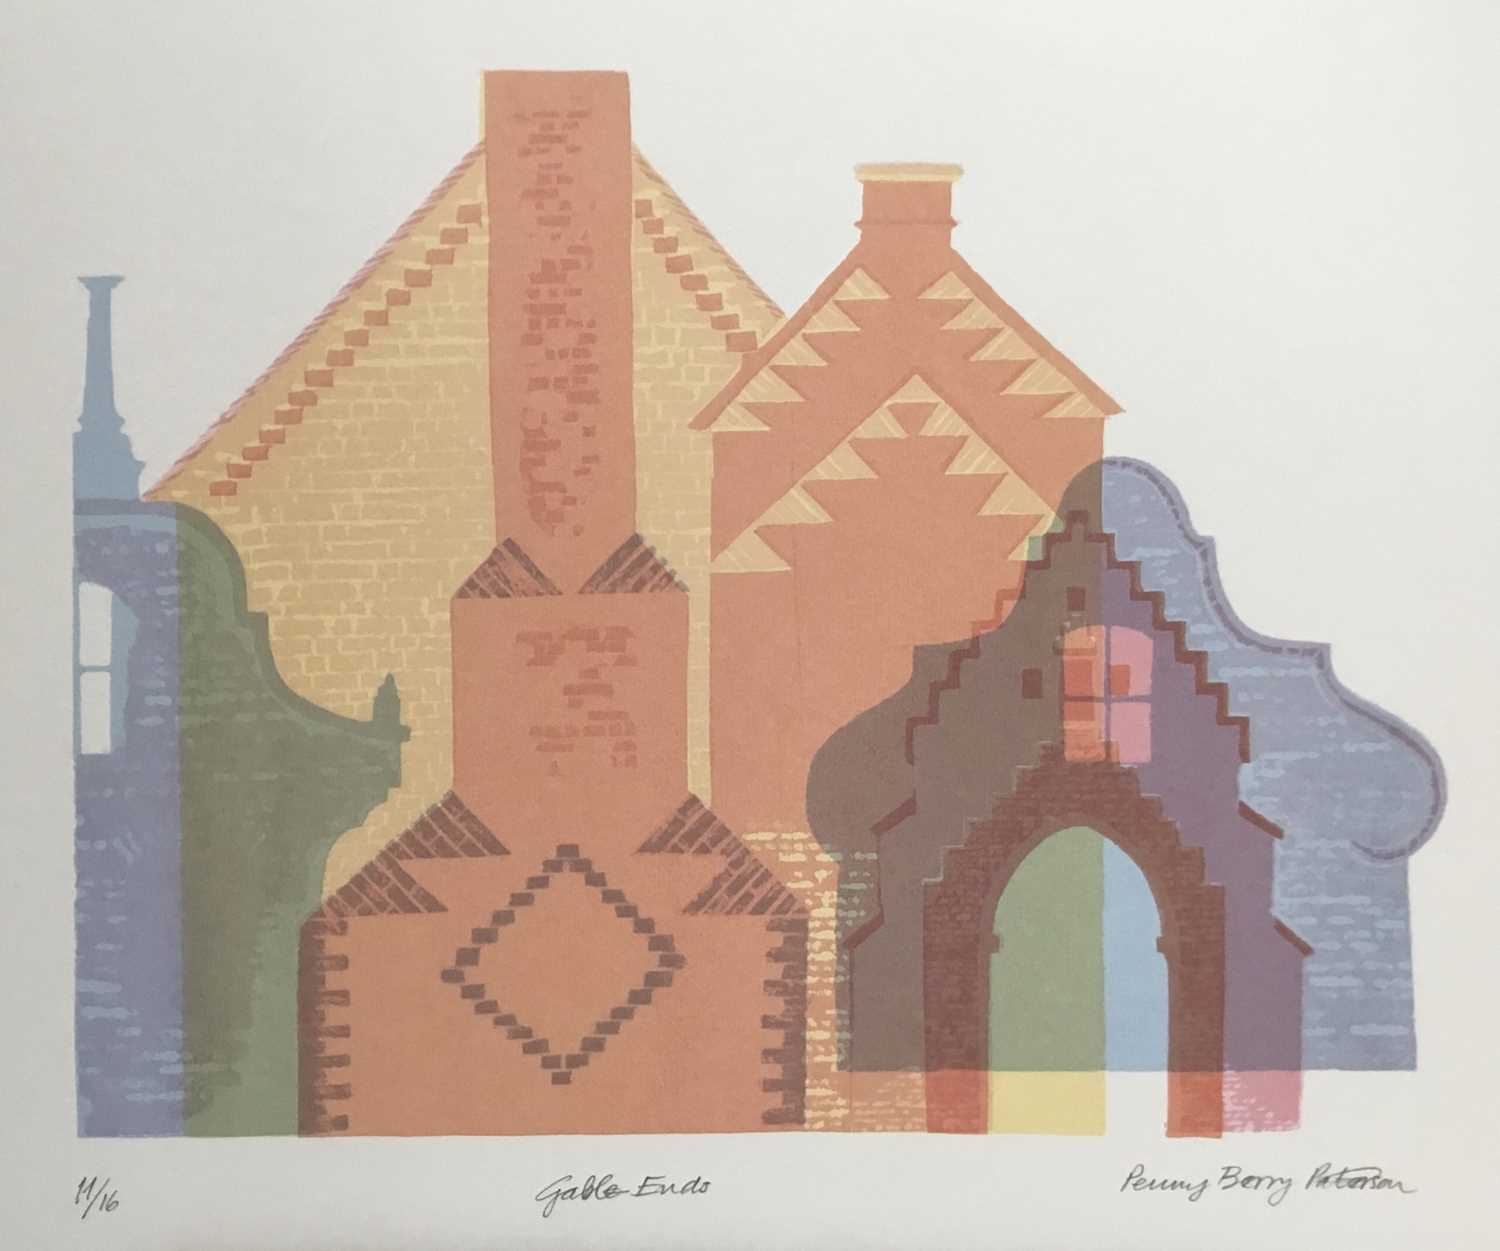 Penny Berry Paterson (1941-2021) colour print, Gable Ends, signed and numbered 11/16, image 29 x 37c